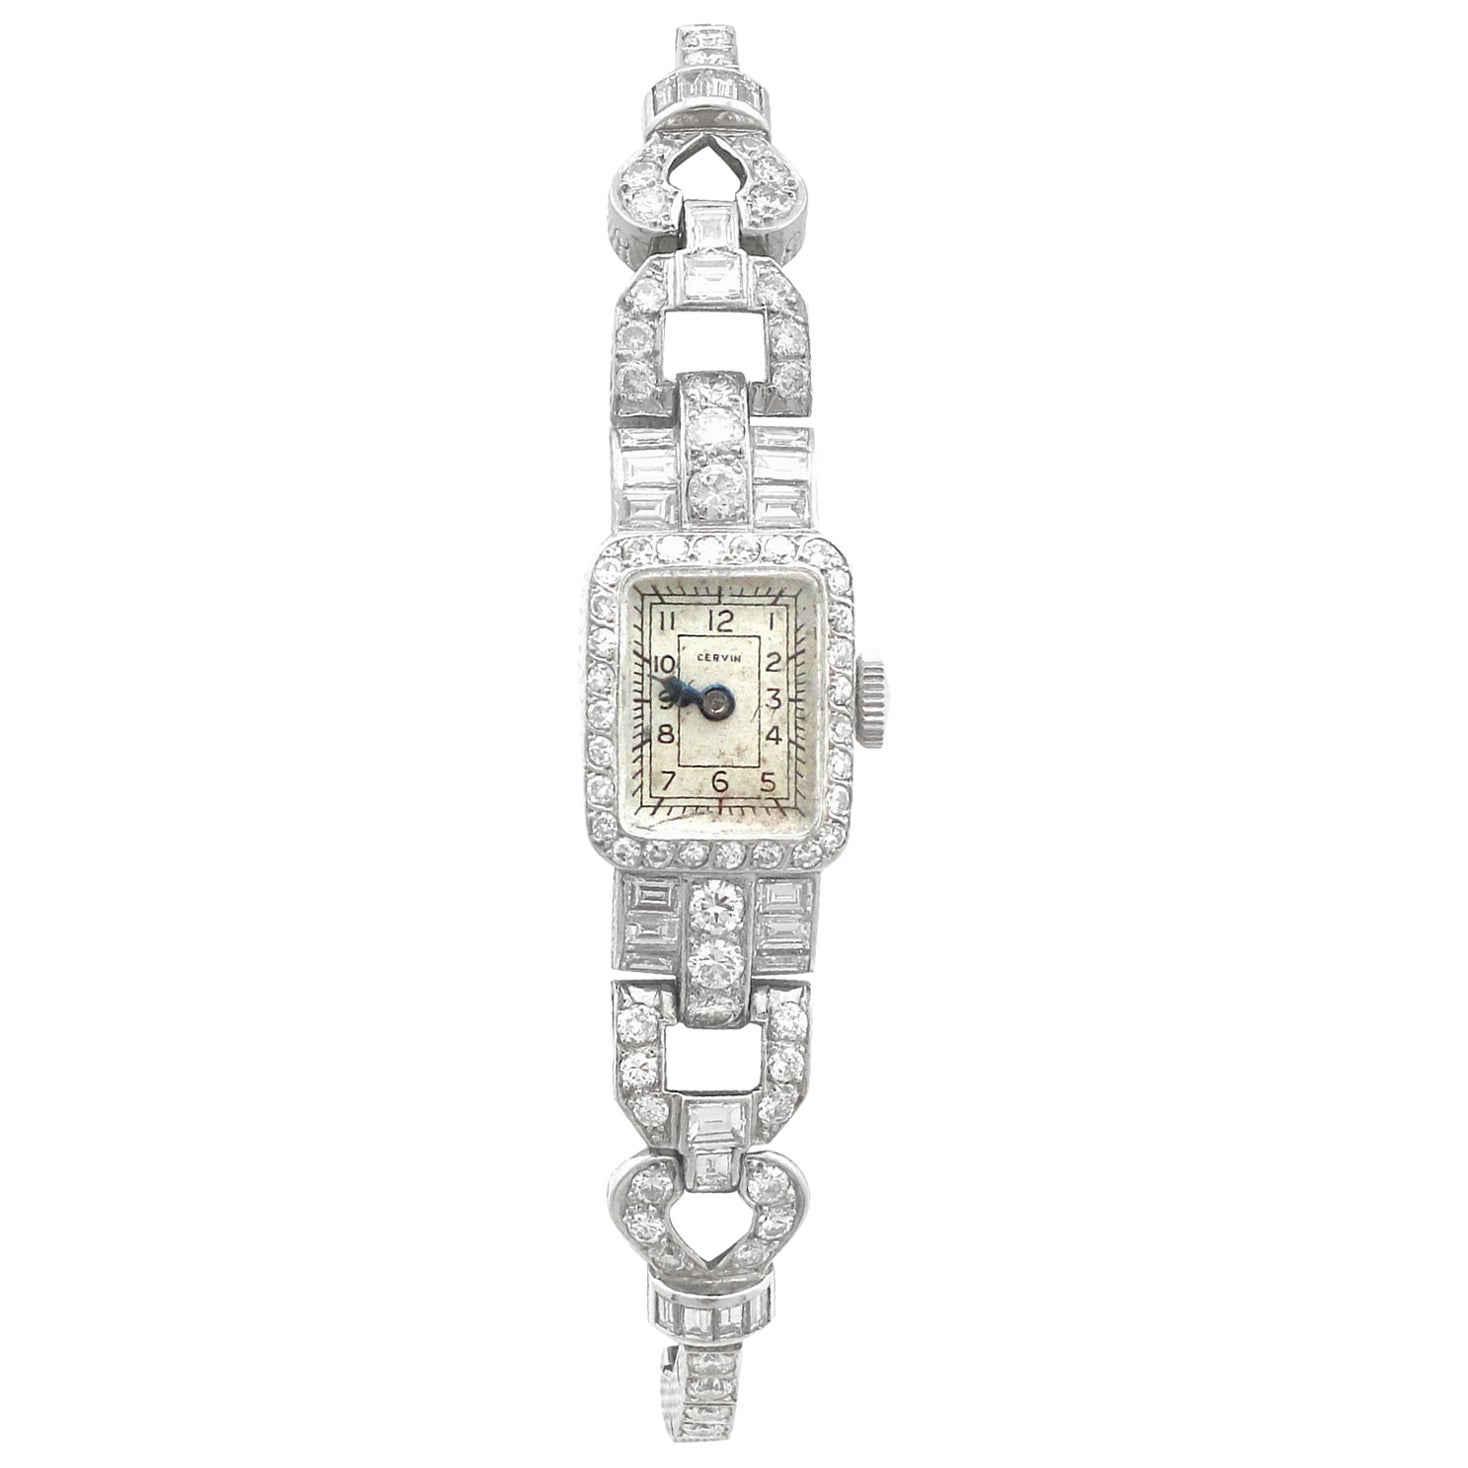 A fine and stunning vintage diamond cocktail watch in platinum, with 3.35 carat (total) diamonds; part of our diverse vintage watch and diamond jewelry collections

This stunning ladies' diamond cocktail watch made by Cervin has been crafted in